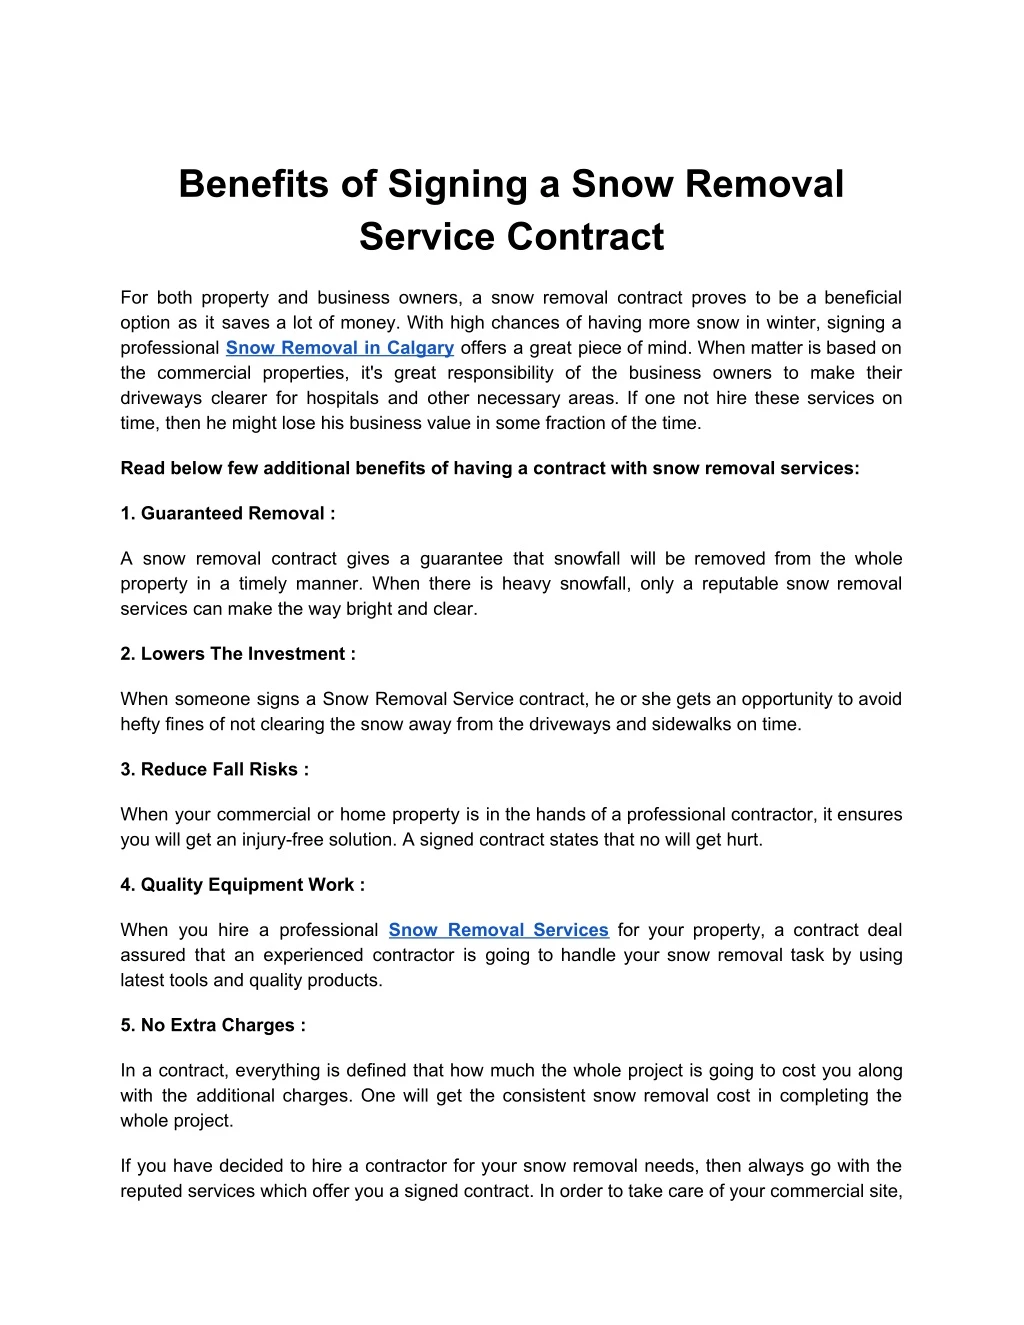 benefits of signing a snow removal service